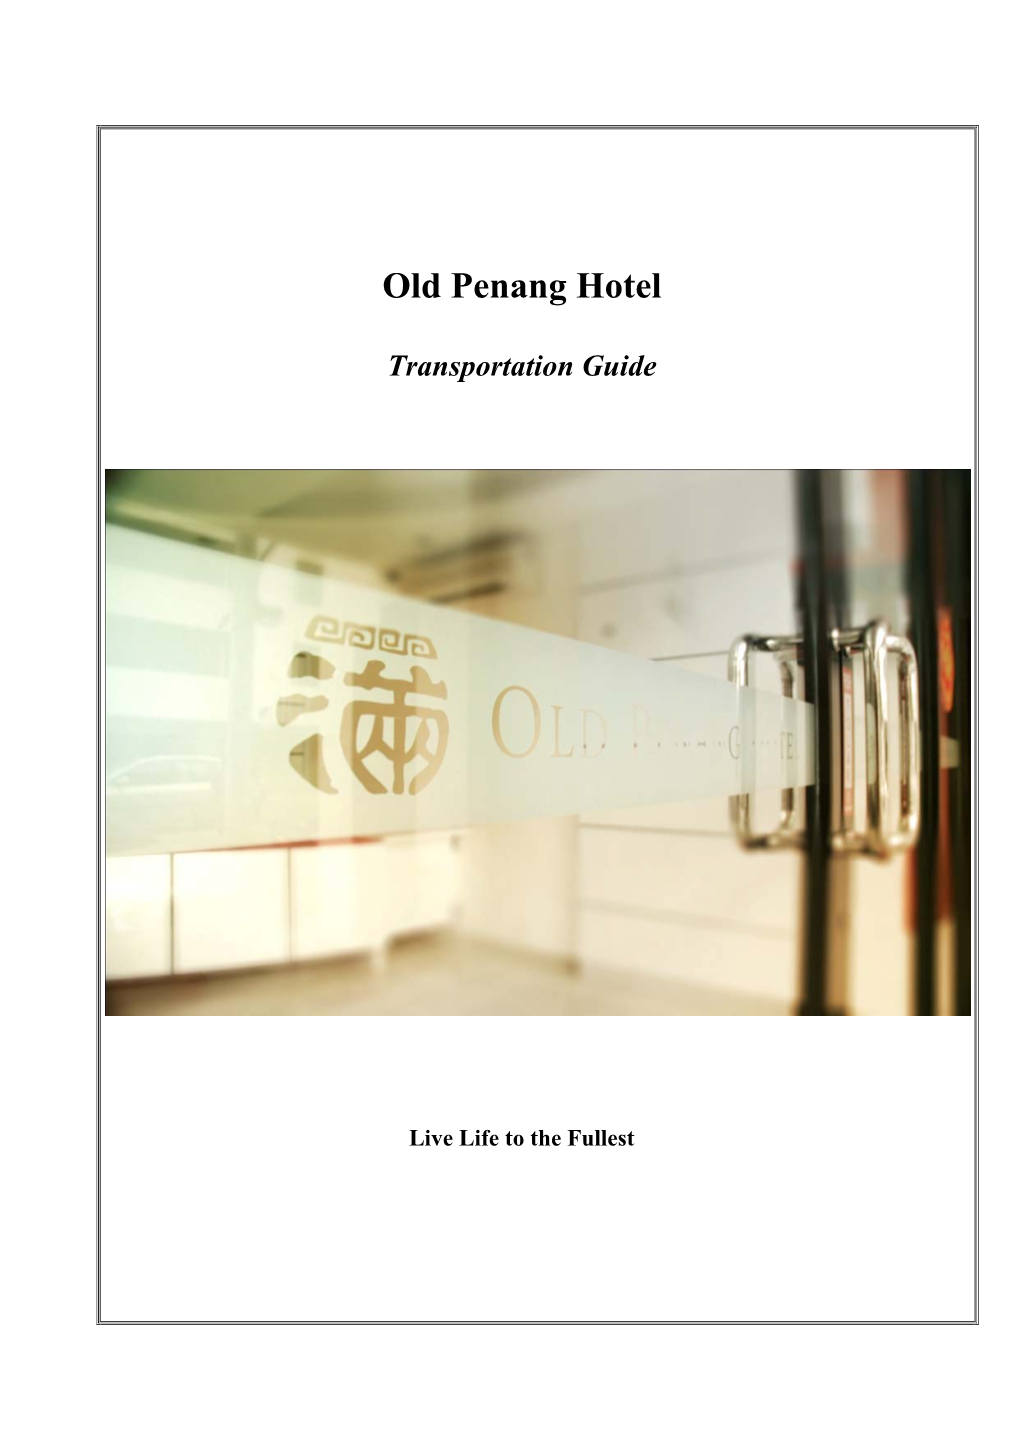 Download PDF Guide on How to Reach Old Penang